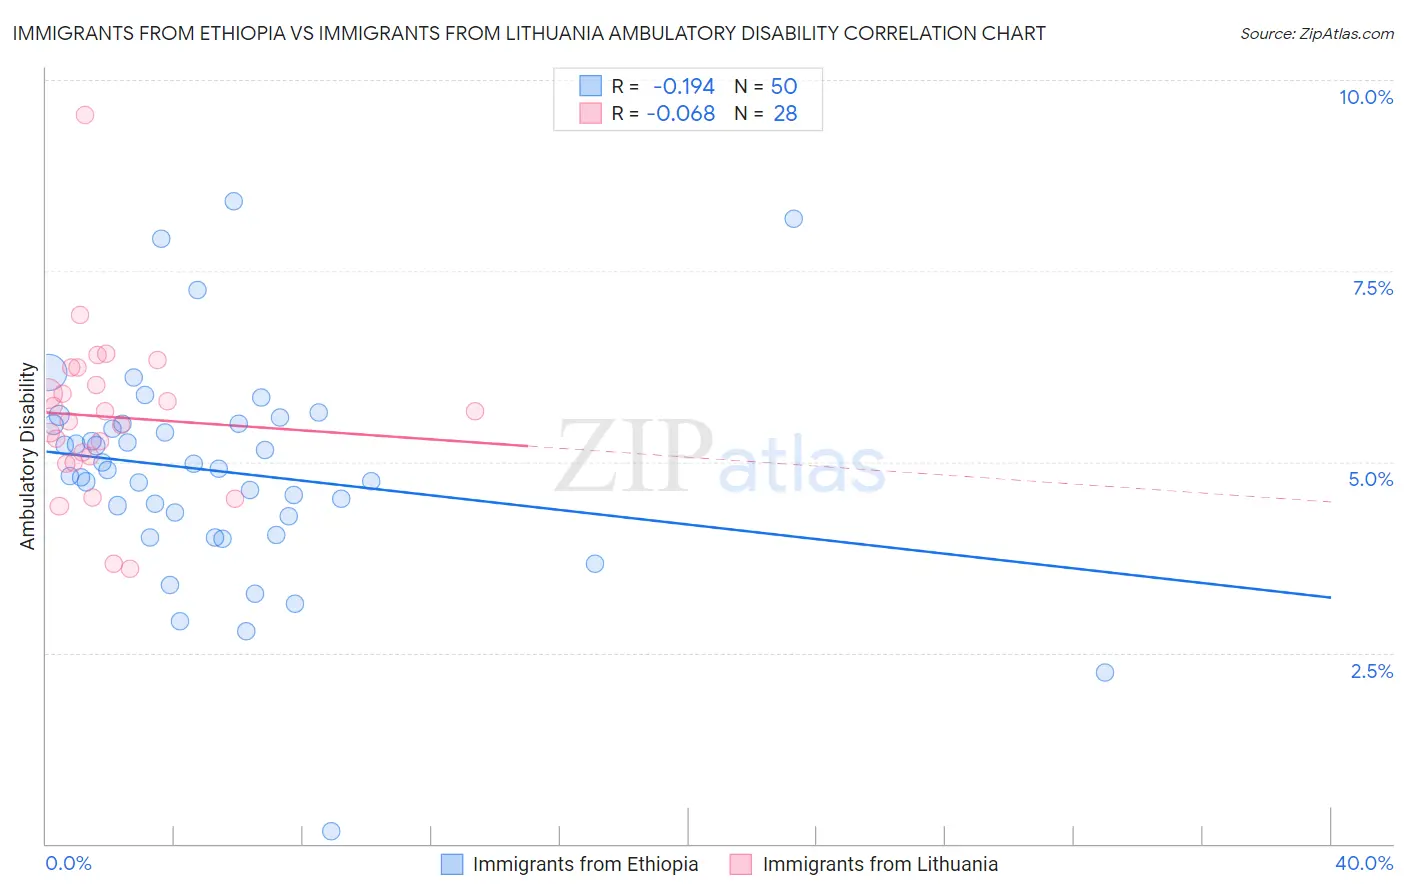 Immigrants from Ethiopia vs Immigrants from Lithuania Ambulatory Disability